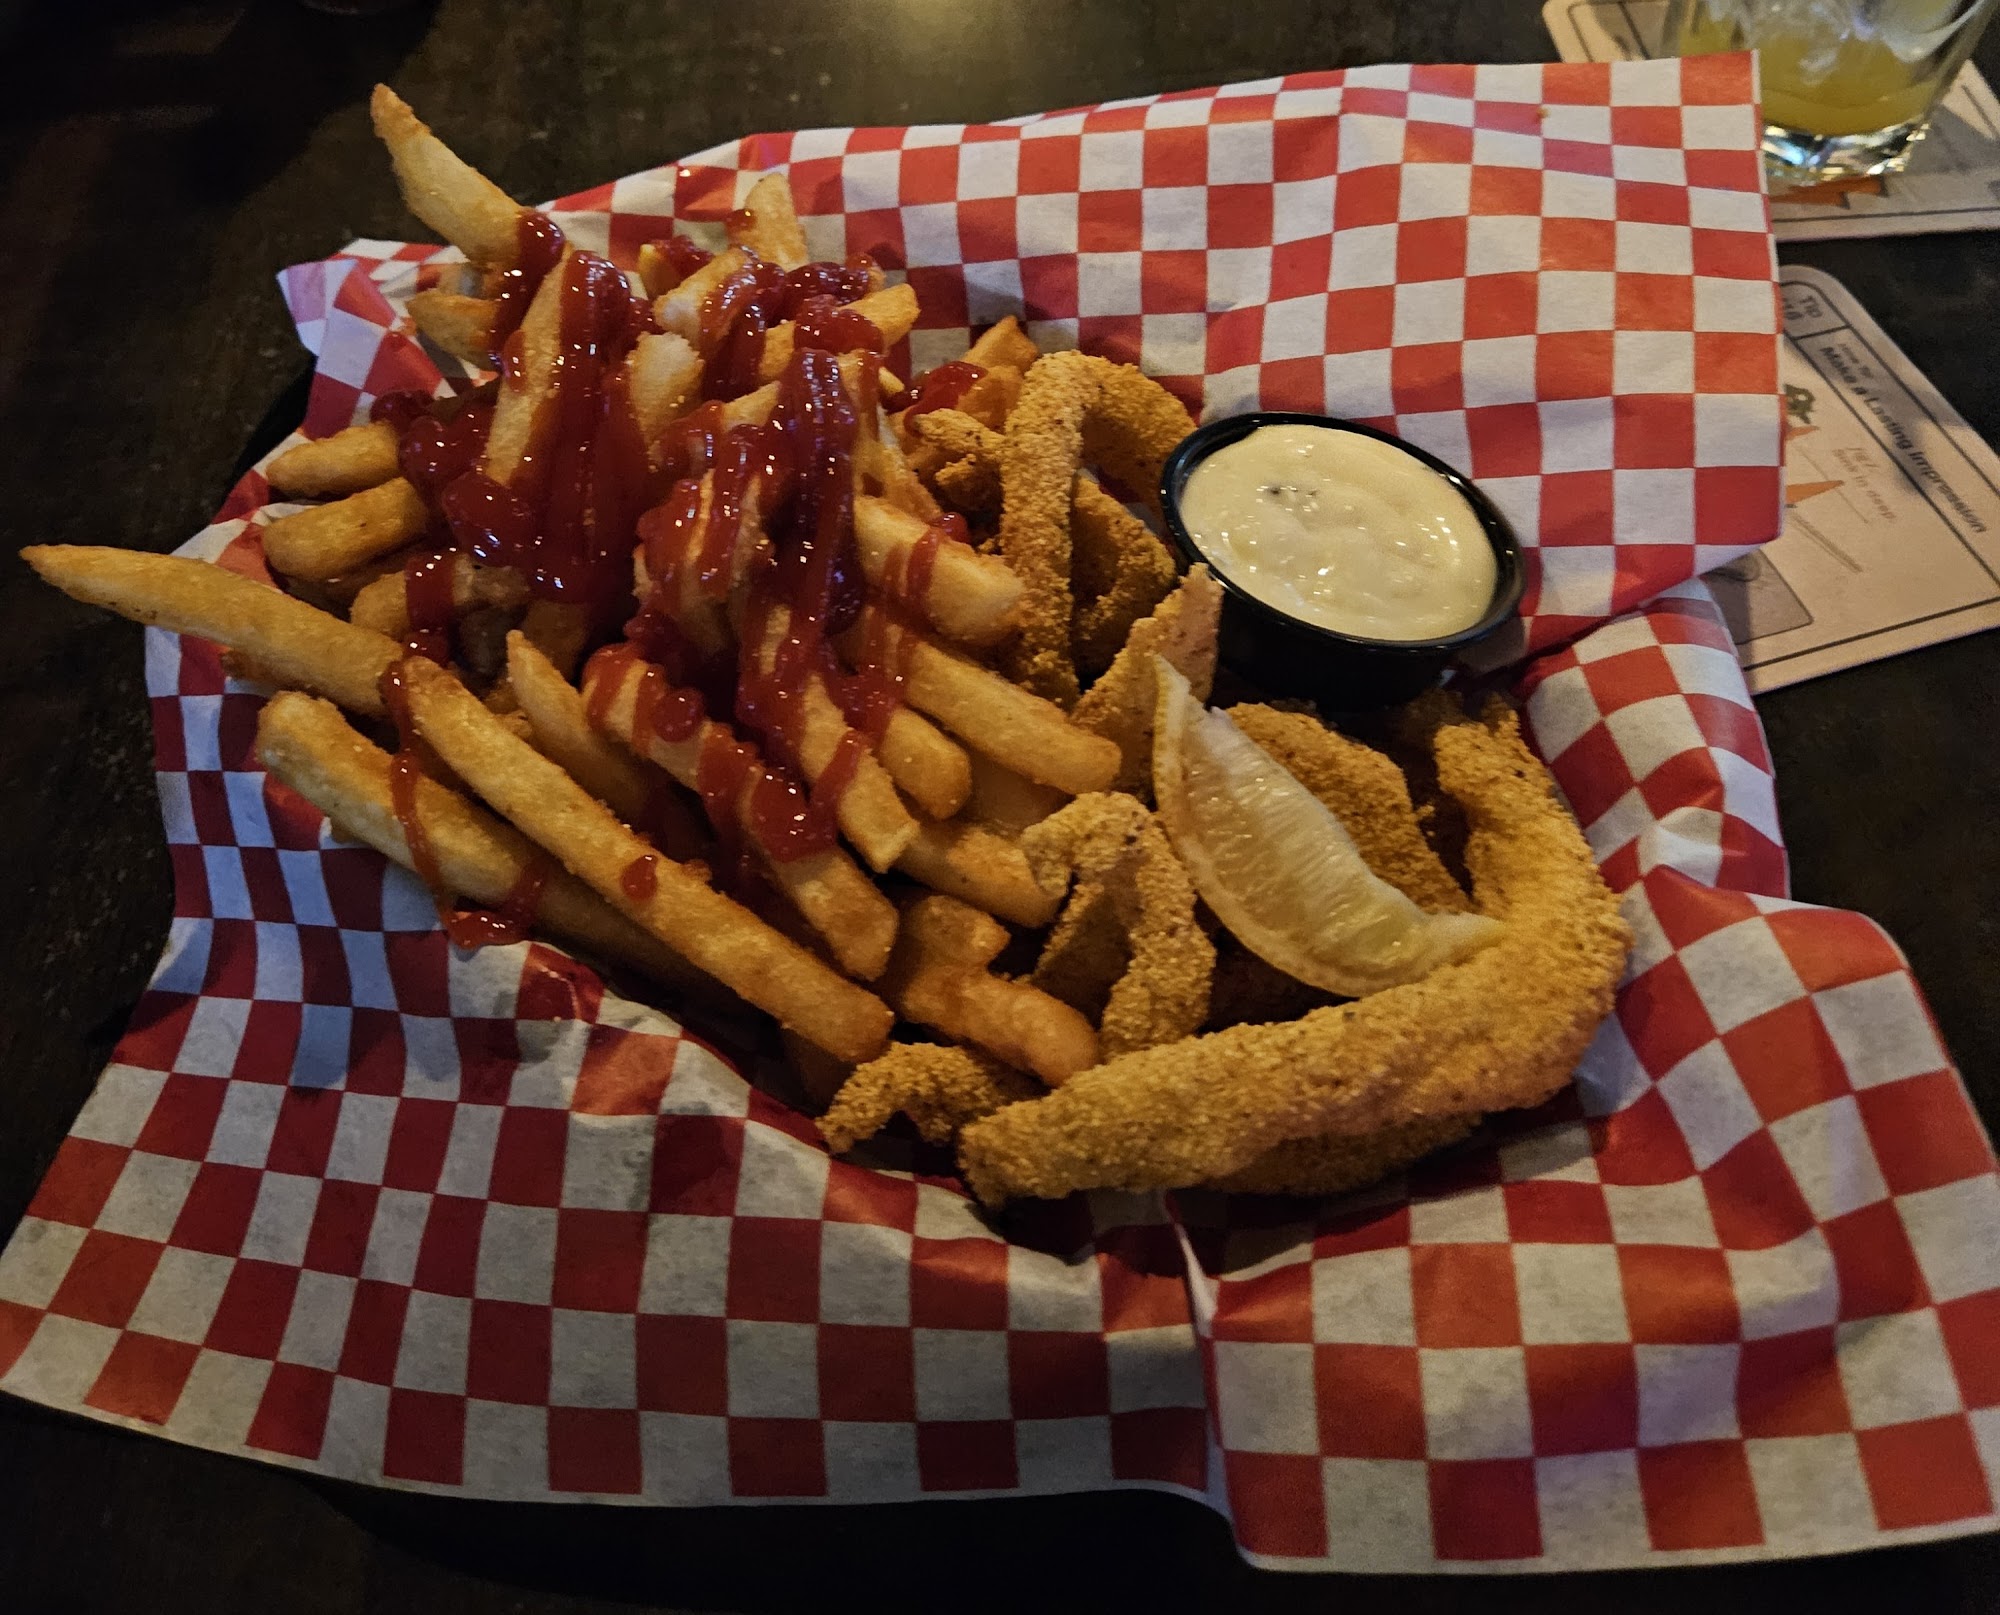 Roosters Sports Bar - Tulsa